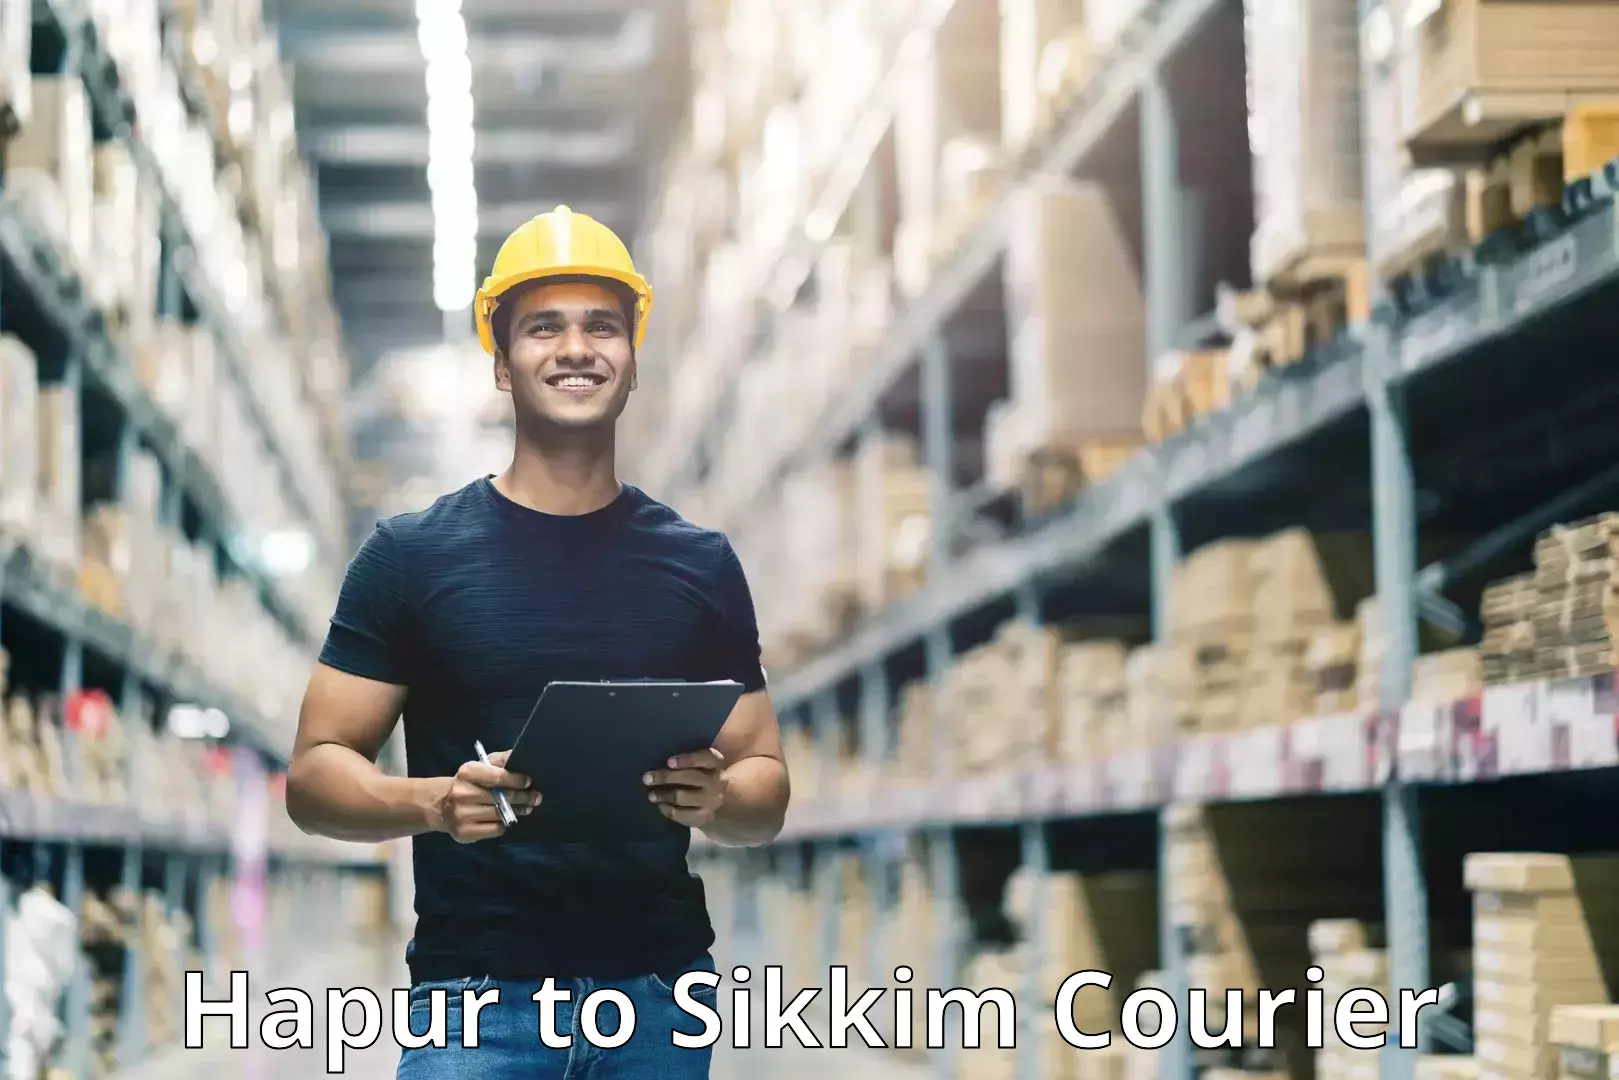 Customer-focused courier Hapur to West Sikkim